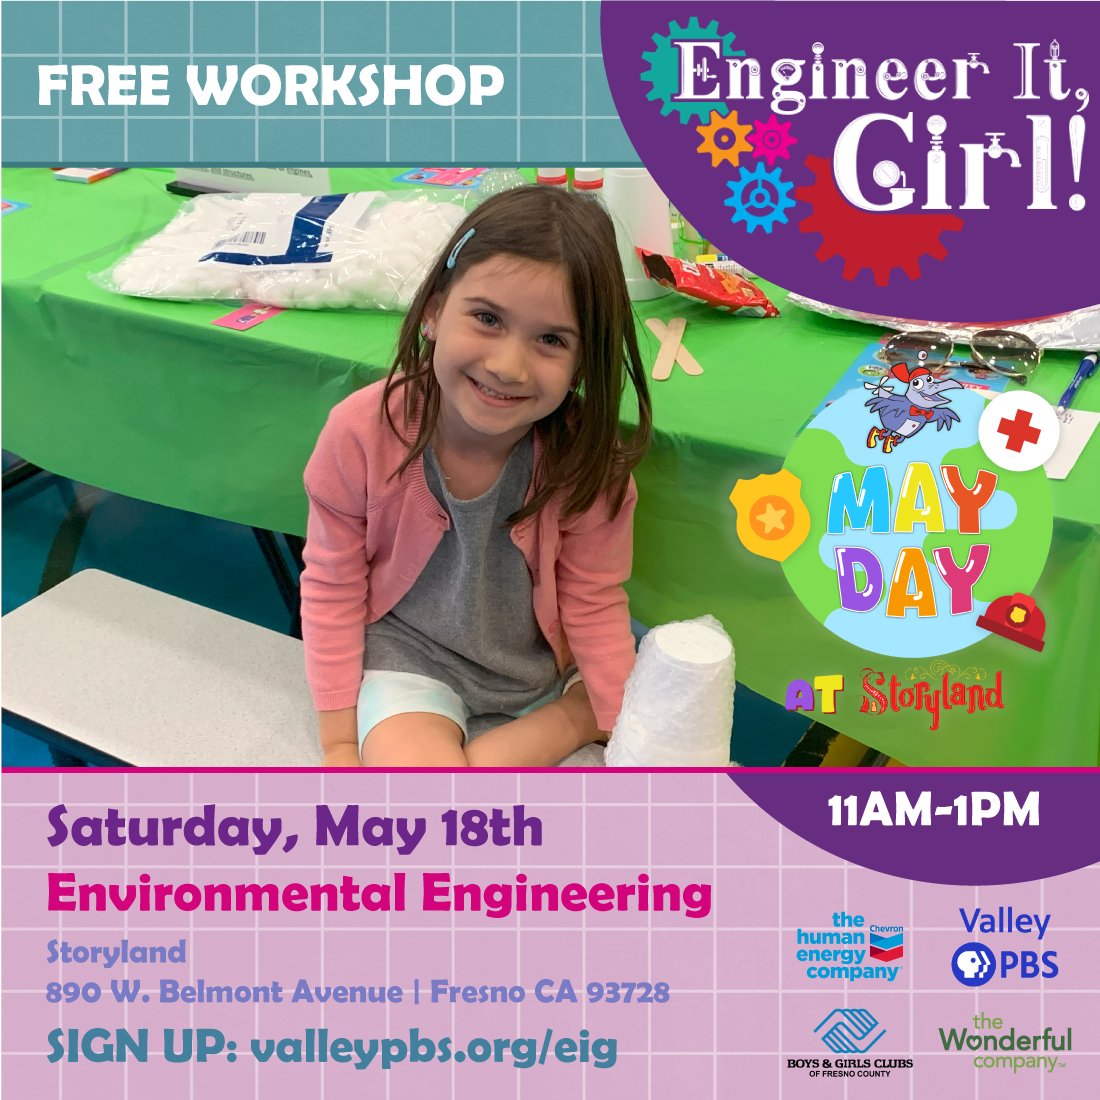 Remember to sign up for the workshop on May 18, 2024 as Valley PBS and Chevron will be traveling to Storyland during May Day for Environmental Engineering. Let’s Engineer It, Girl! Sign-up: valleypbs.org/eig